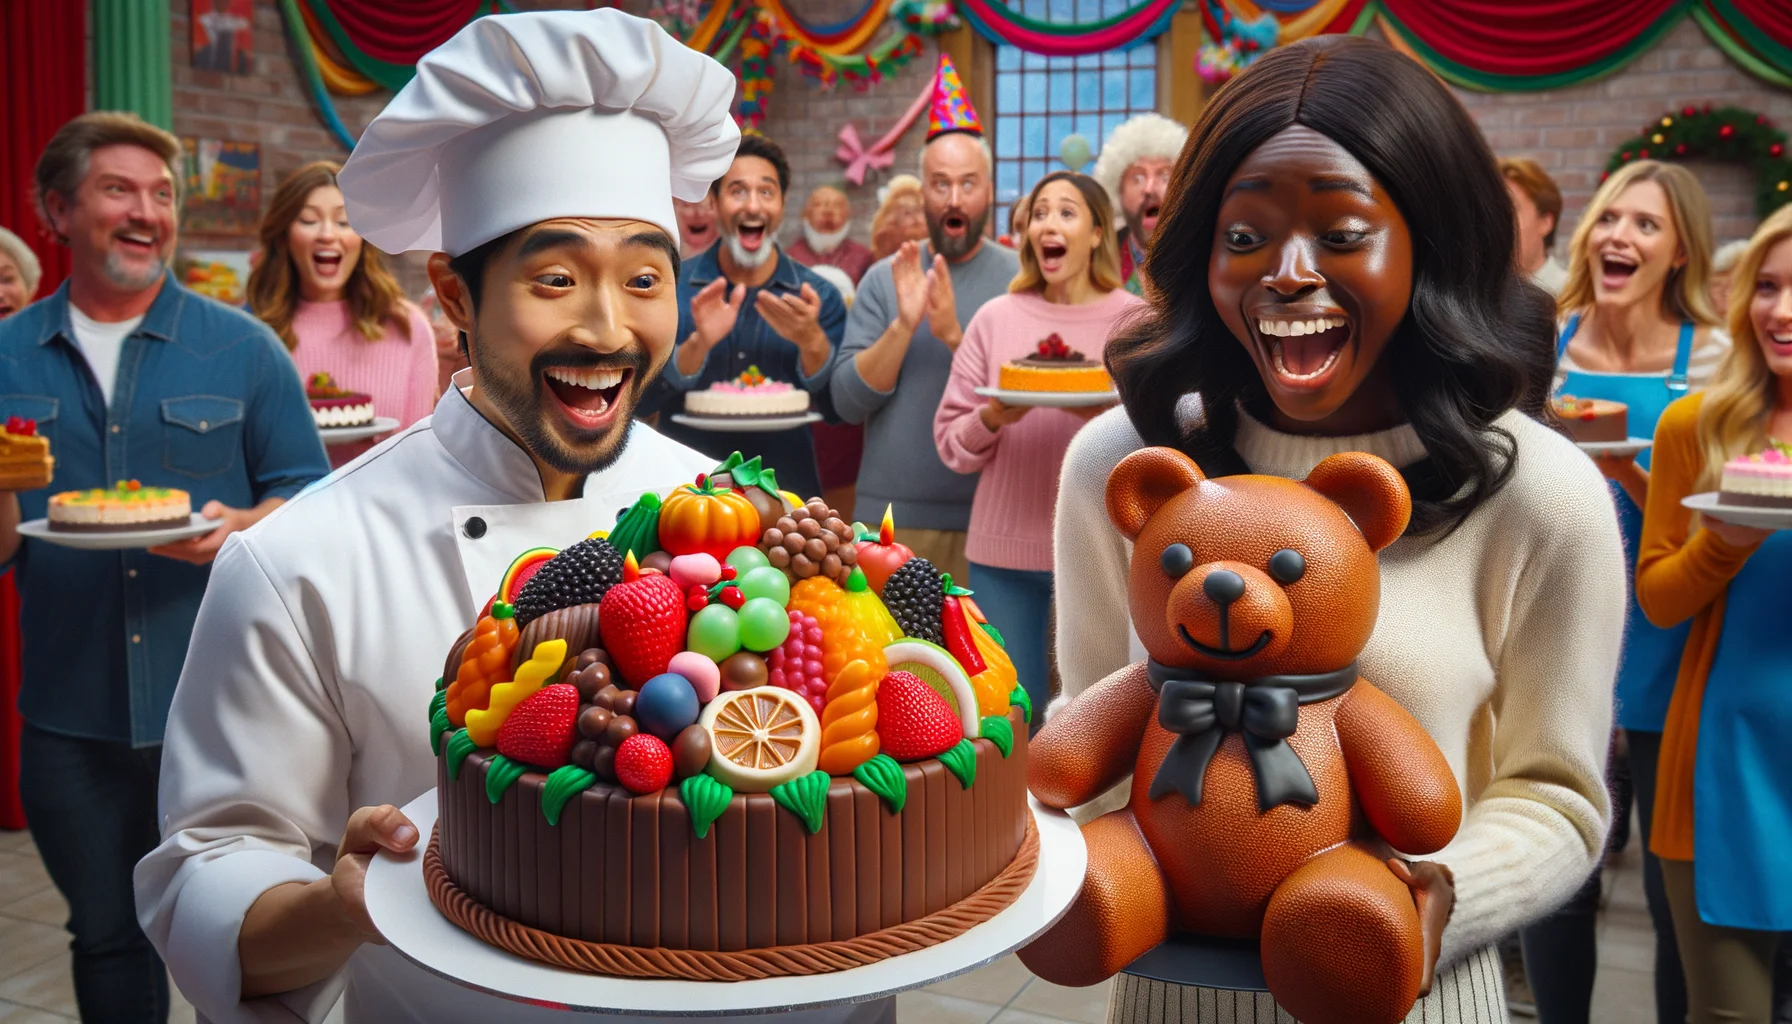 Imagine a humorous, lifelike scene revolving around the theme of edible gifts: A South Asian man in a chef's outfit, holding a beautifully decorated chocolate cake shaped like a giant fruit basket. Next to him, a black woman is laughing with surprise and delight, holding a life-sized and shockingly realistic gummy bear. They are in a colorful, festive room full of people, all reacting to these creative and tasty presents with various expressions of awe, amusement, and appetite.